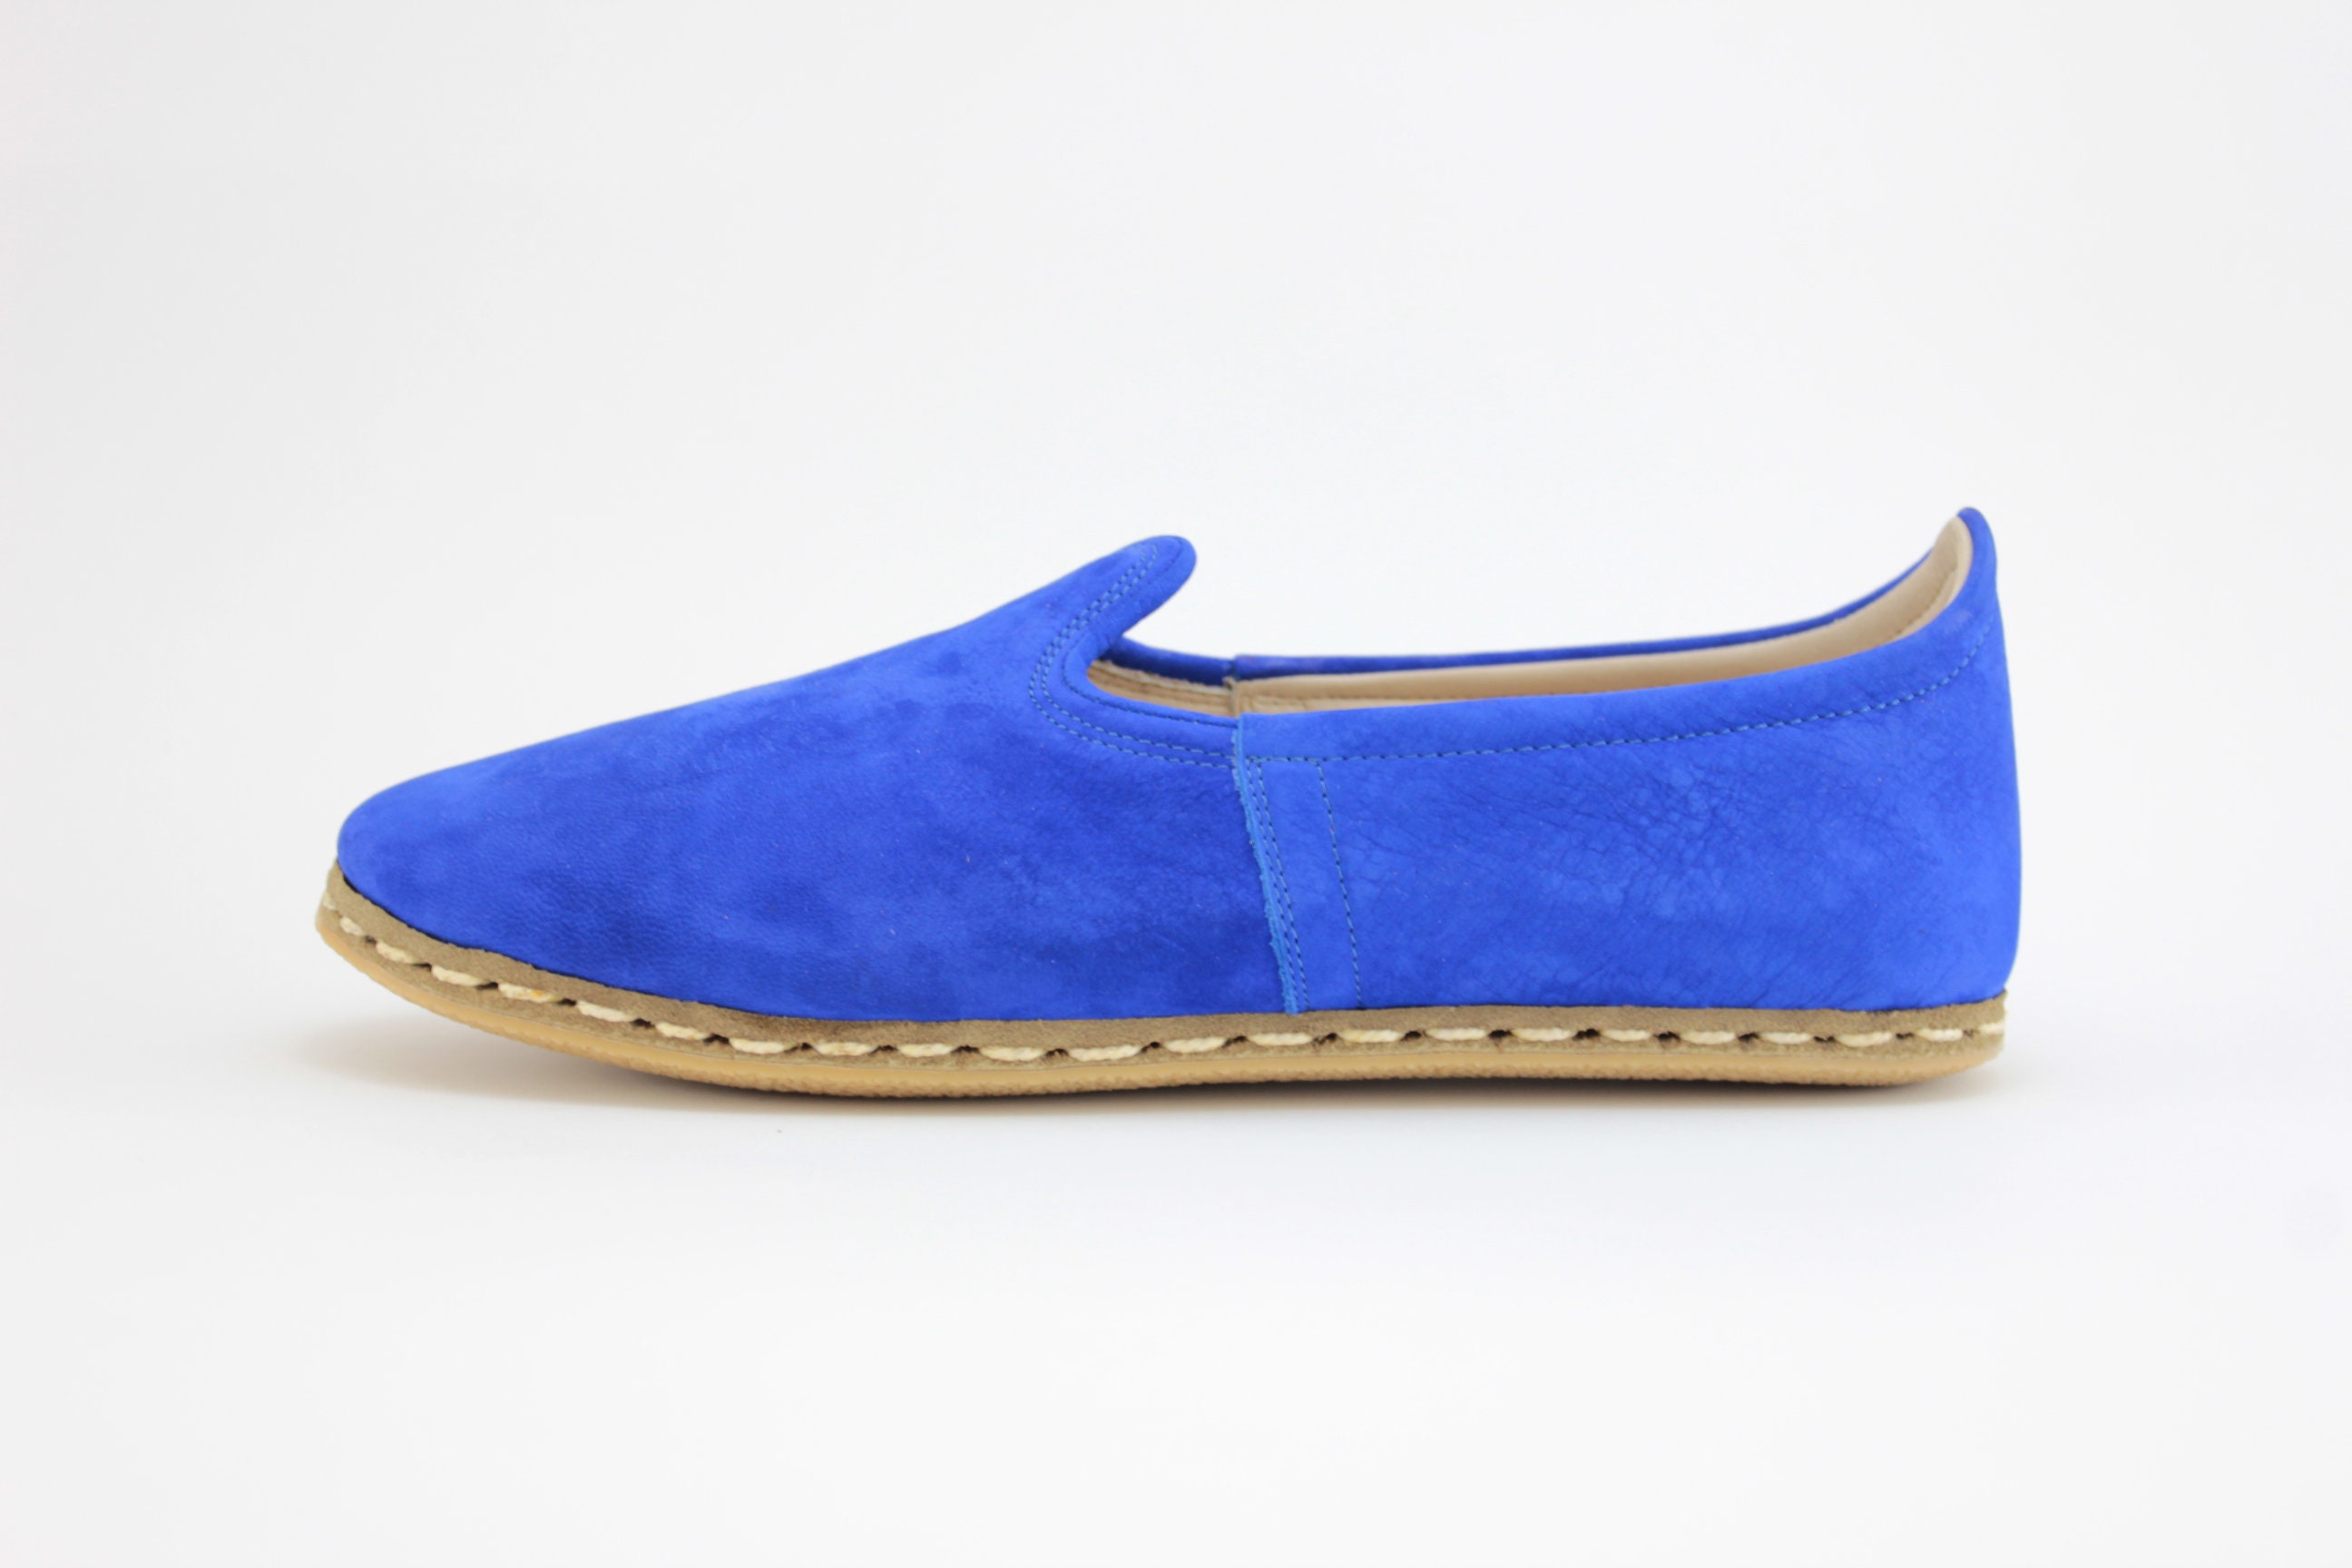 Fashionable Slip ons Nubuck Flat Shoes traditional Yemeni Cobalt Blue Color House Shoes Comfort Handmade Loafer Men's Suede Leather Shoes Mens Shoes Loafers & Slip Ons 